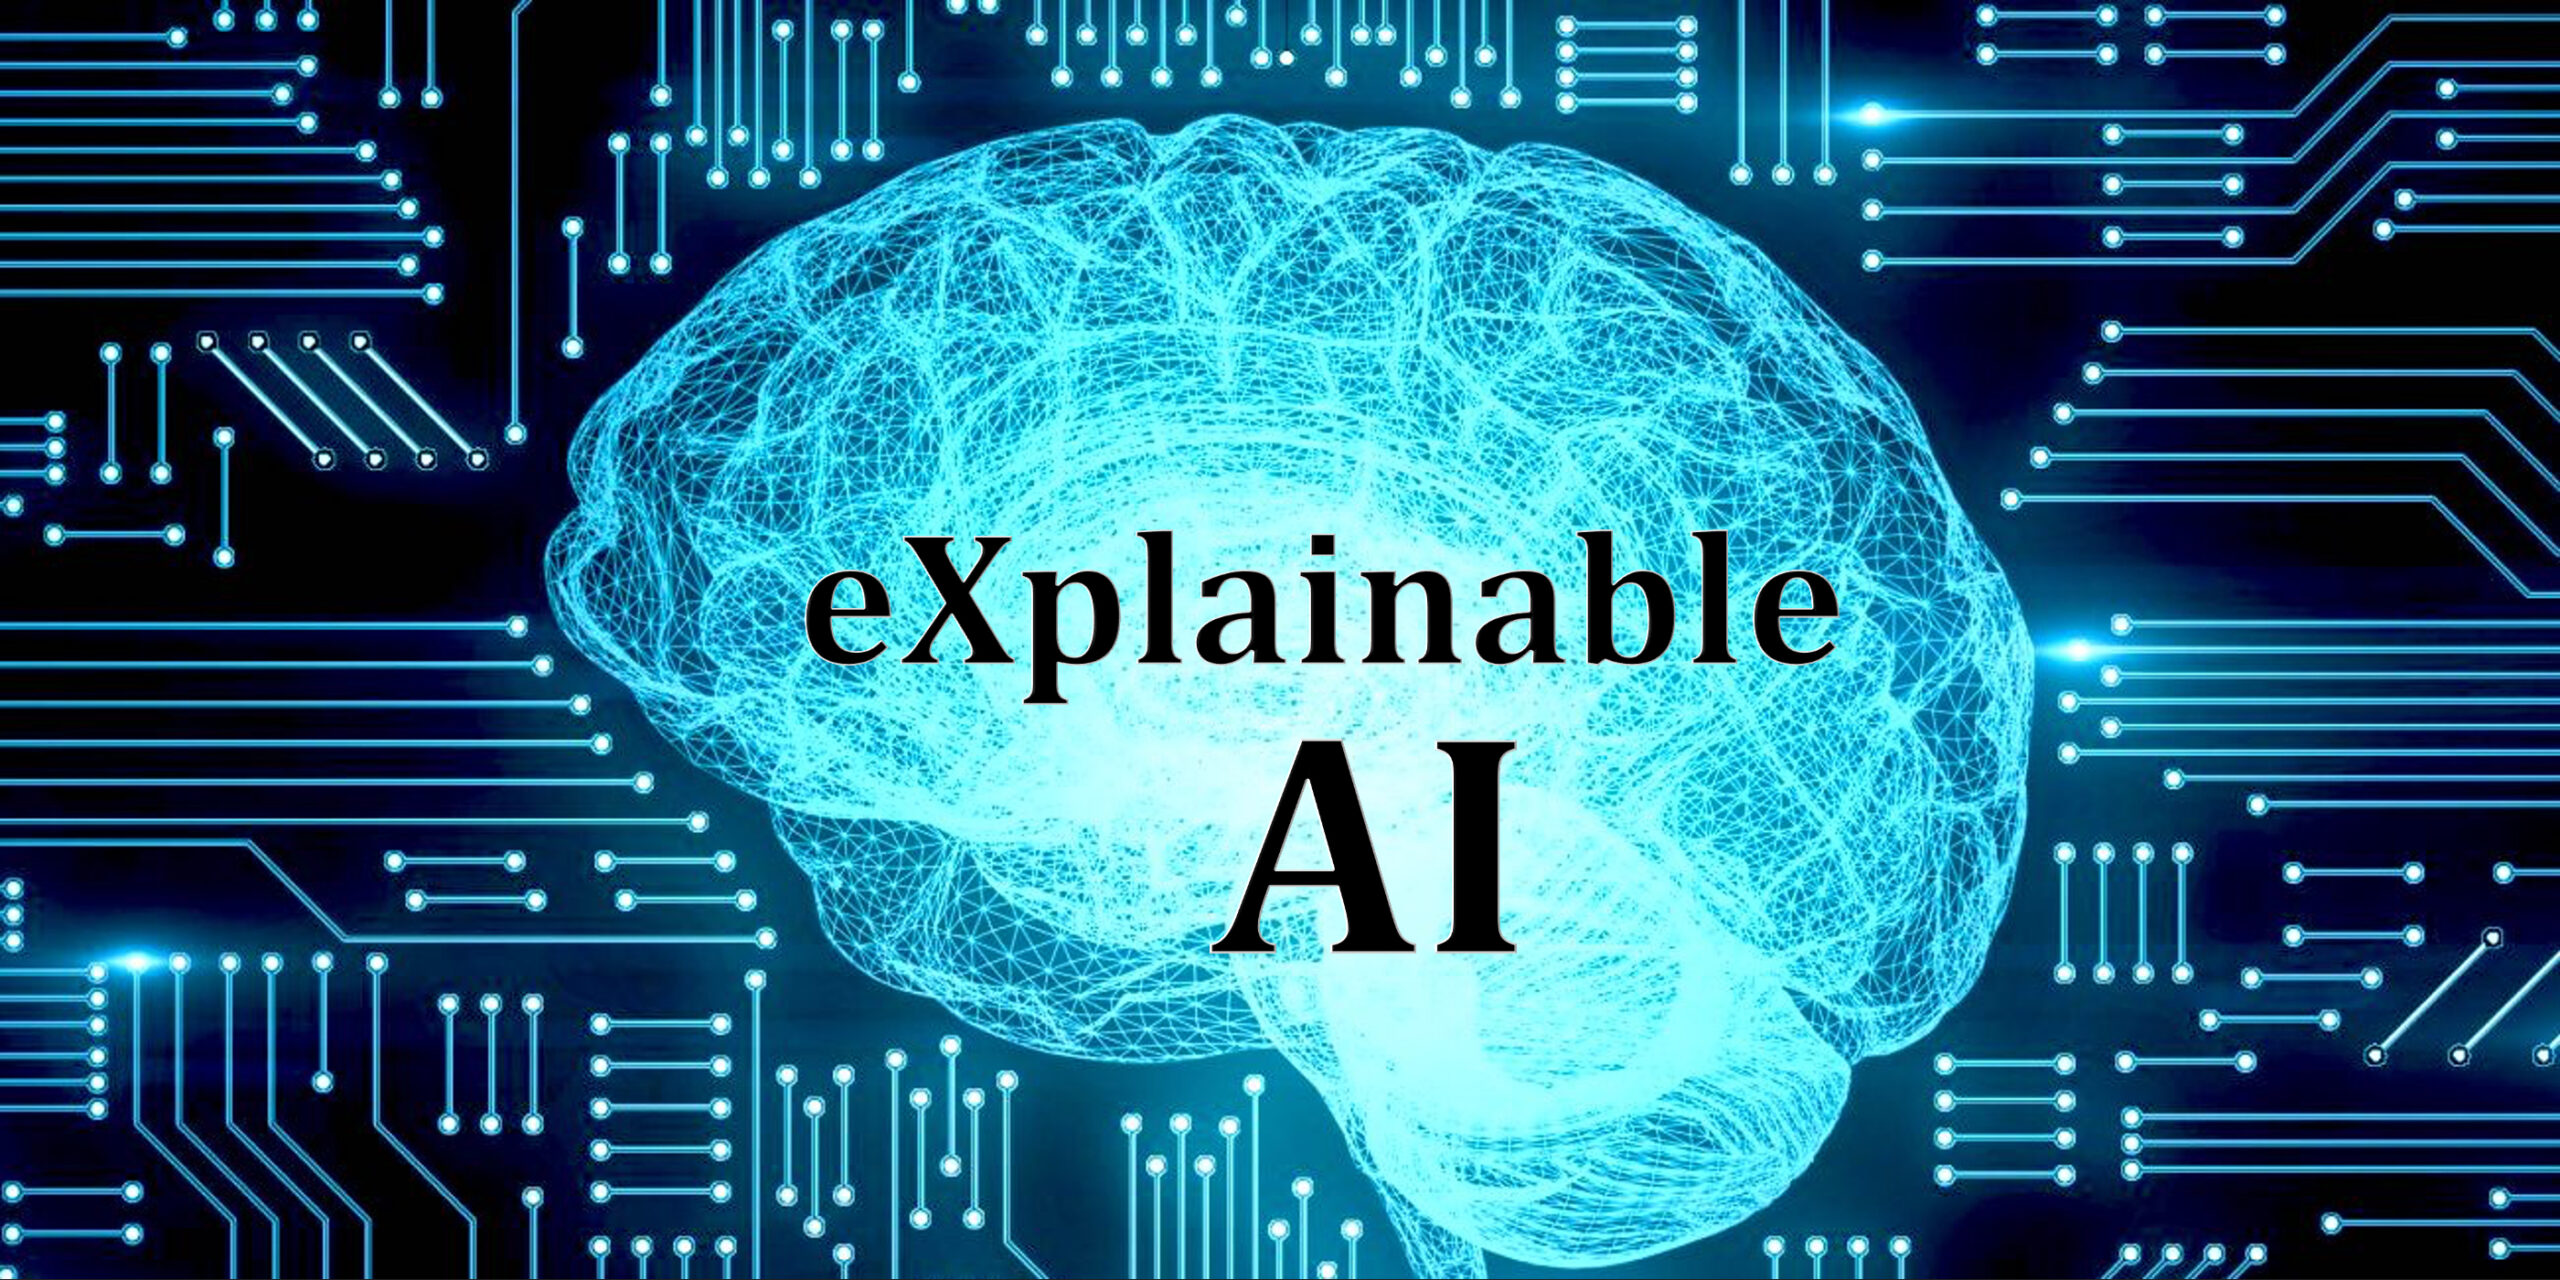 Explainable AI: Techniques and methods for making AI systems more transparent and interpretable